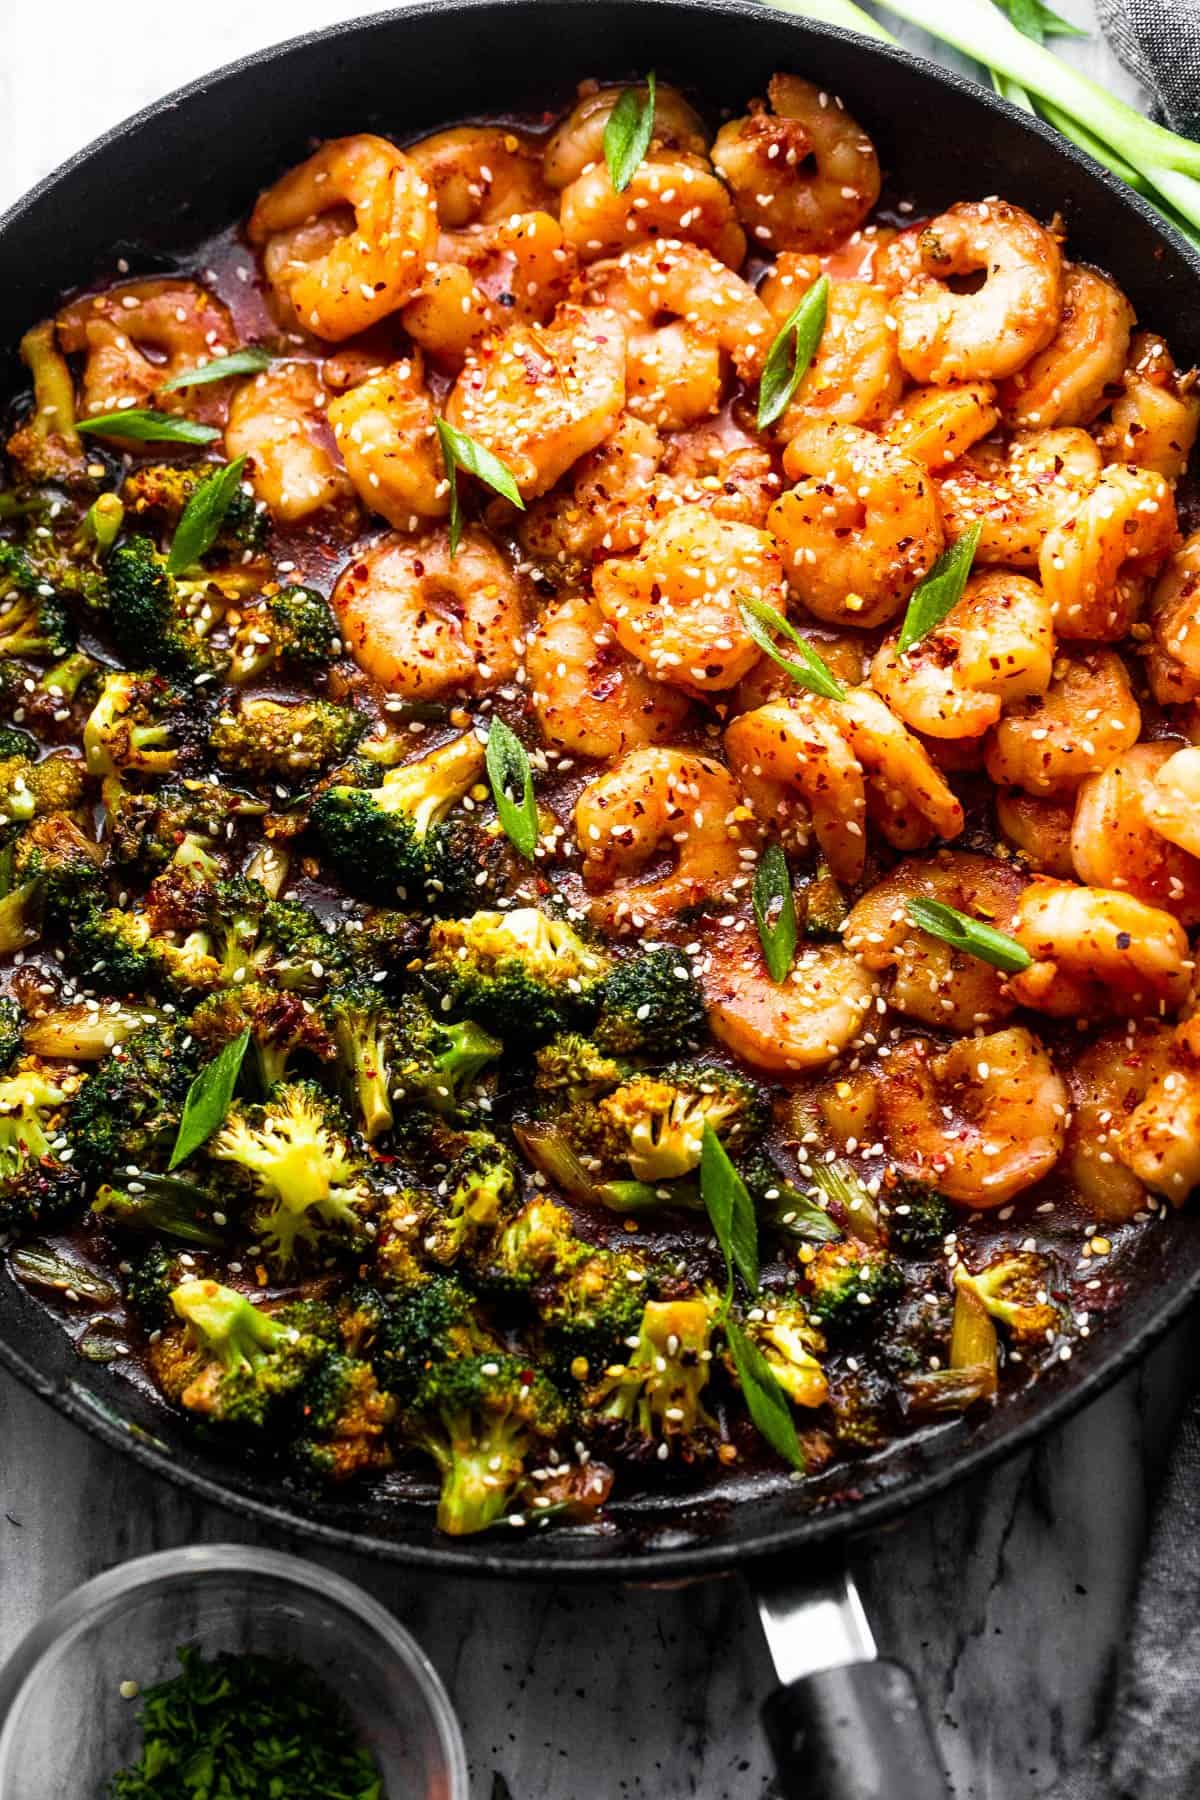 A large black skillet is full of broccoli on one side and shrimp on the other side, all sprinkled with sesame seeds and green onions.